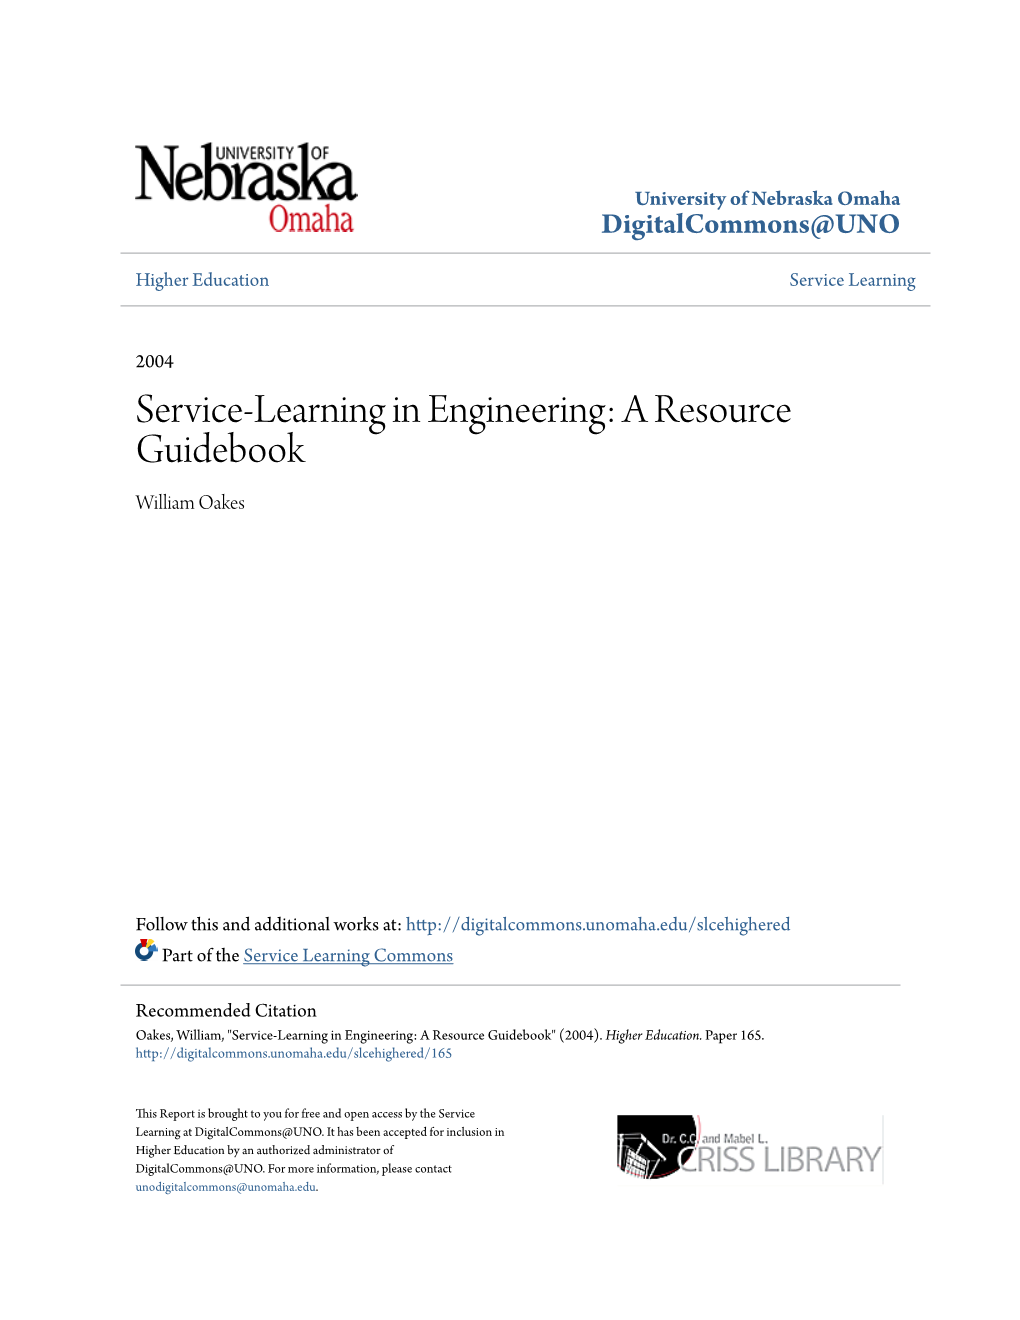 Service-Learning in Engineering: a Resource Guidebook William Oakes